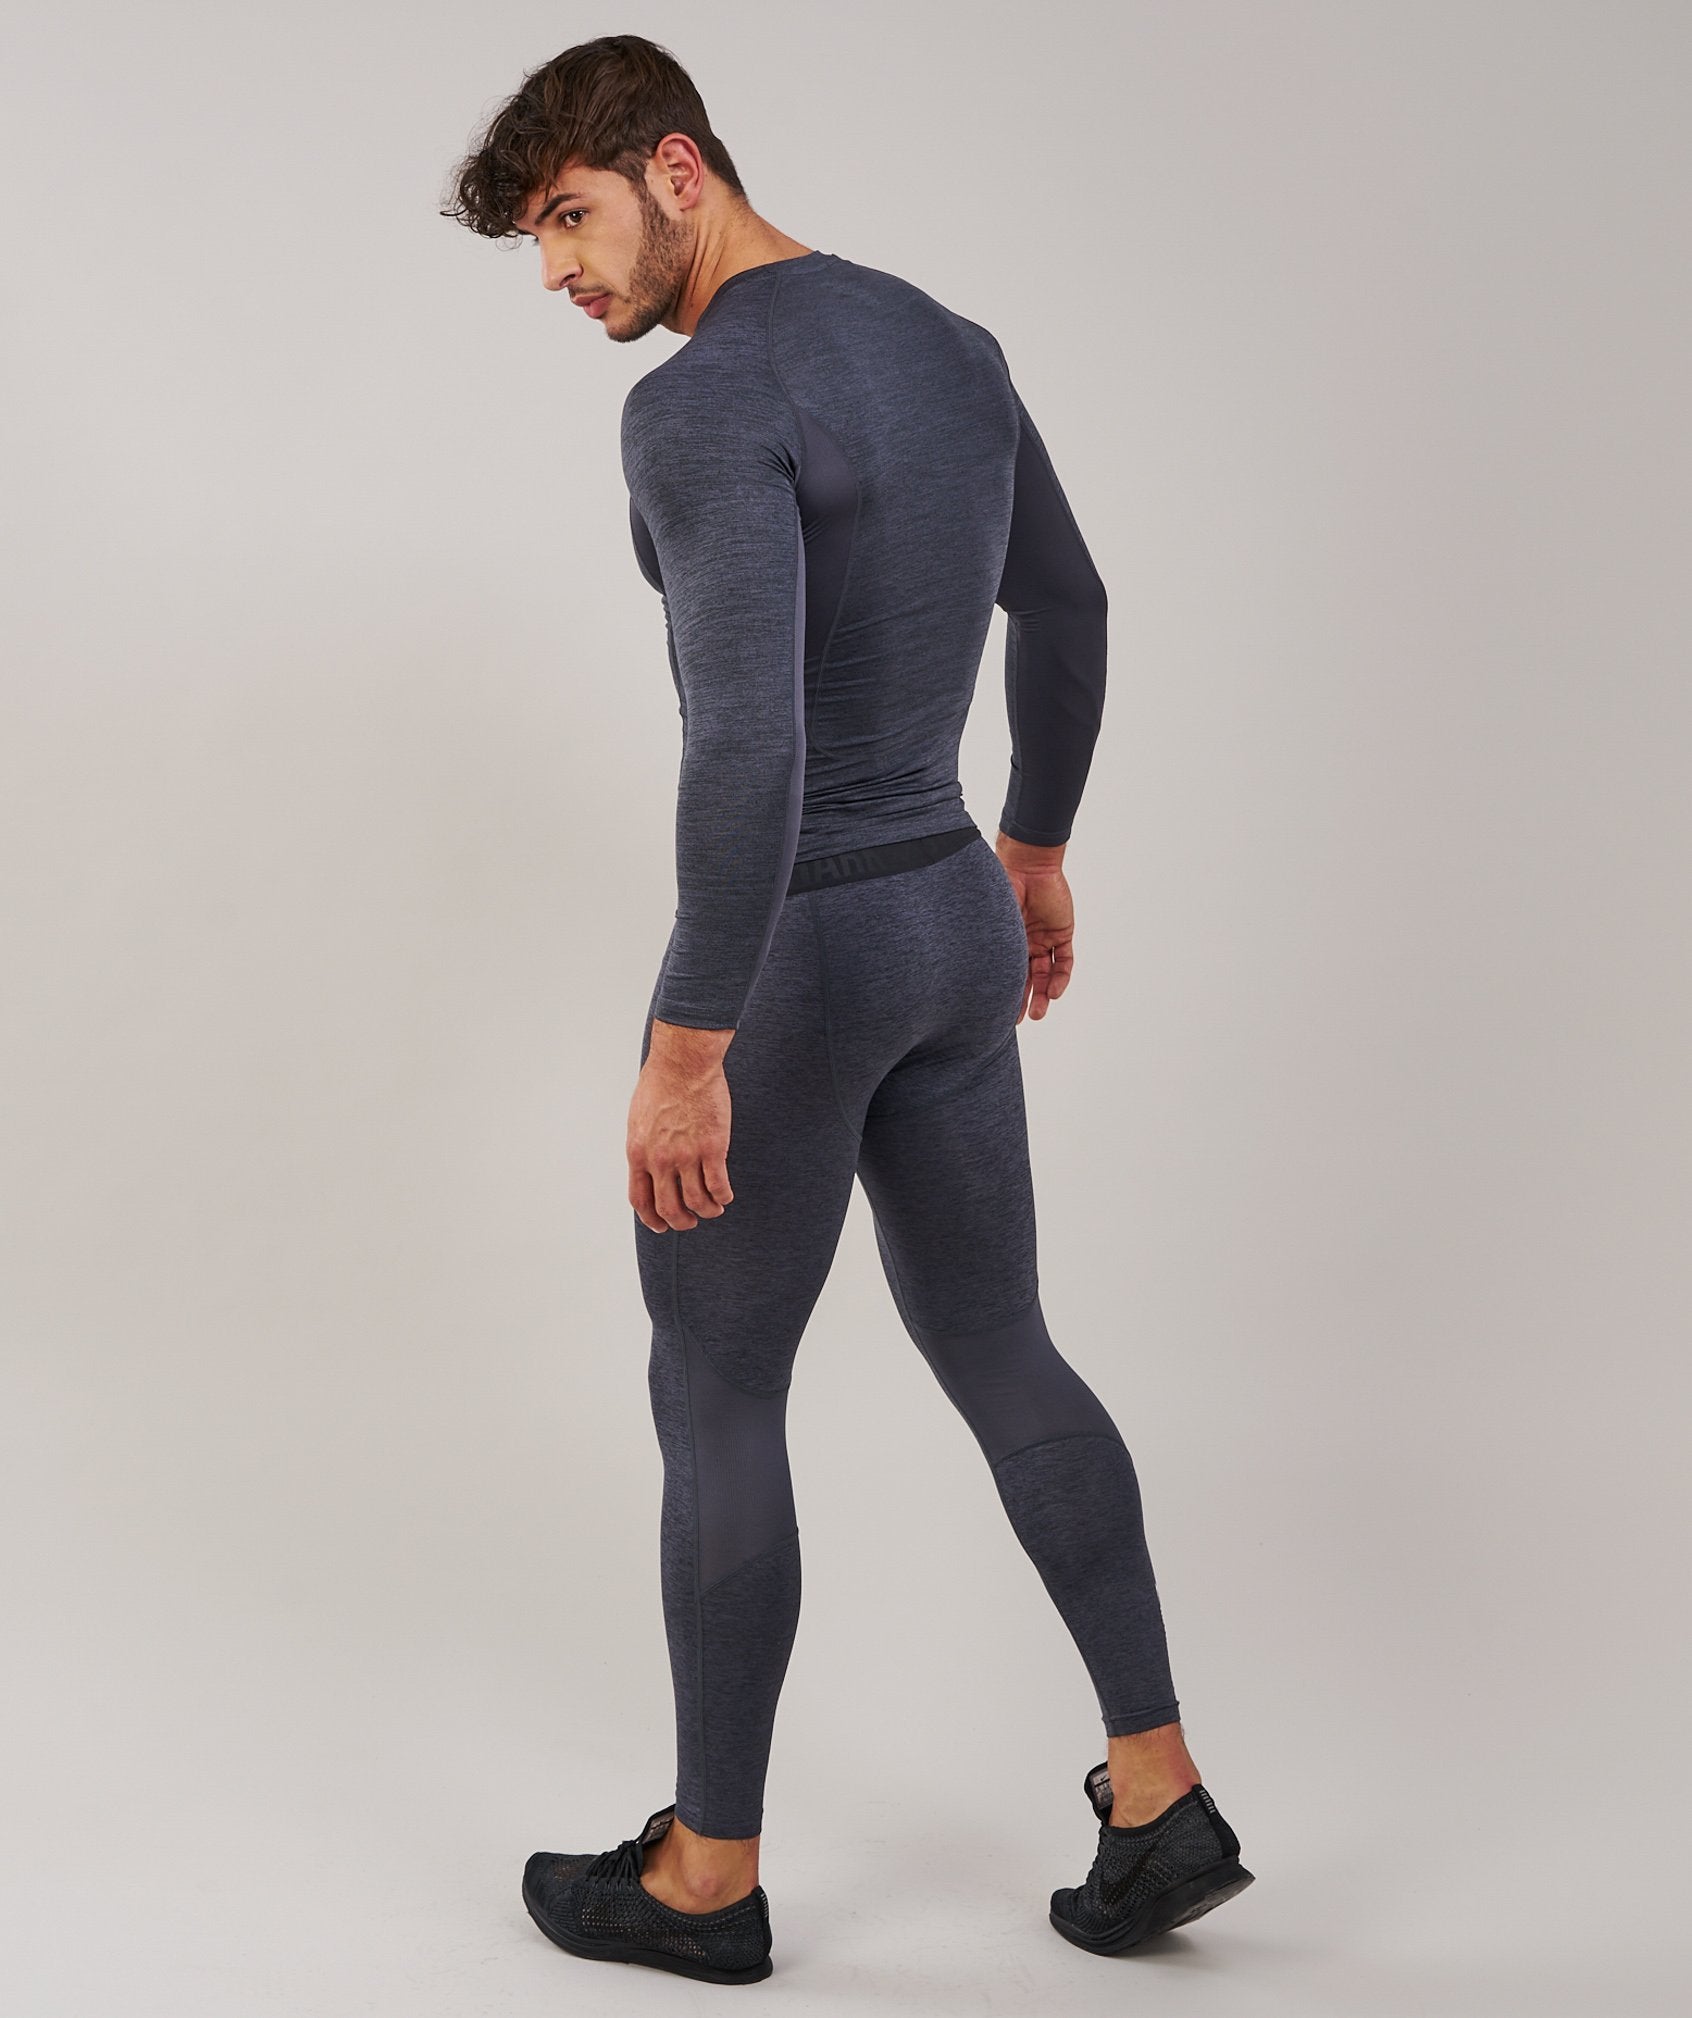 Element Baselayer Leggings in Charcoal Marl - view 3